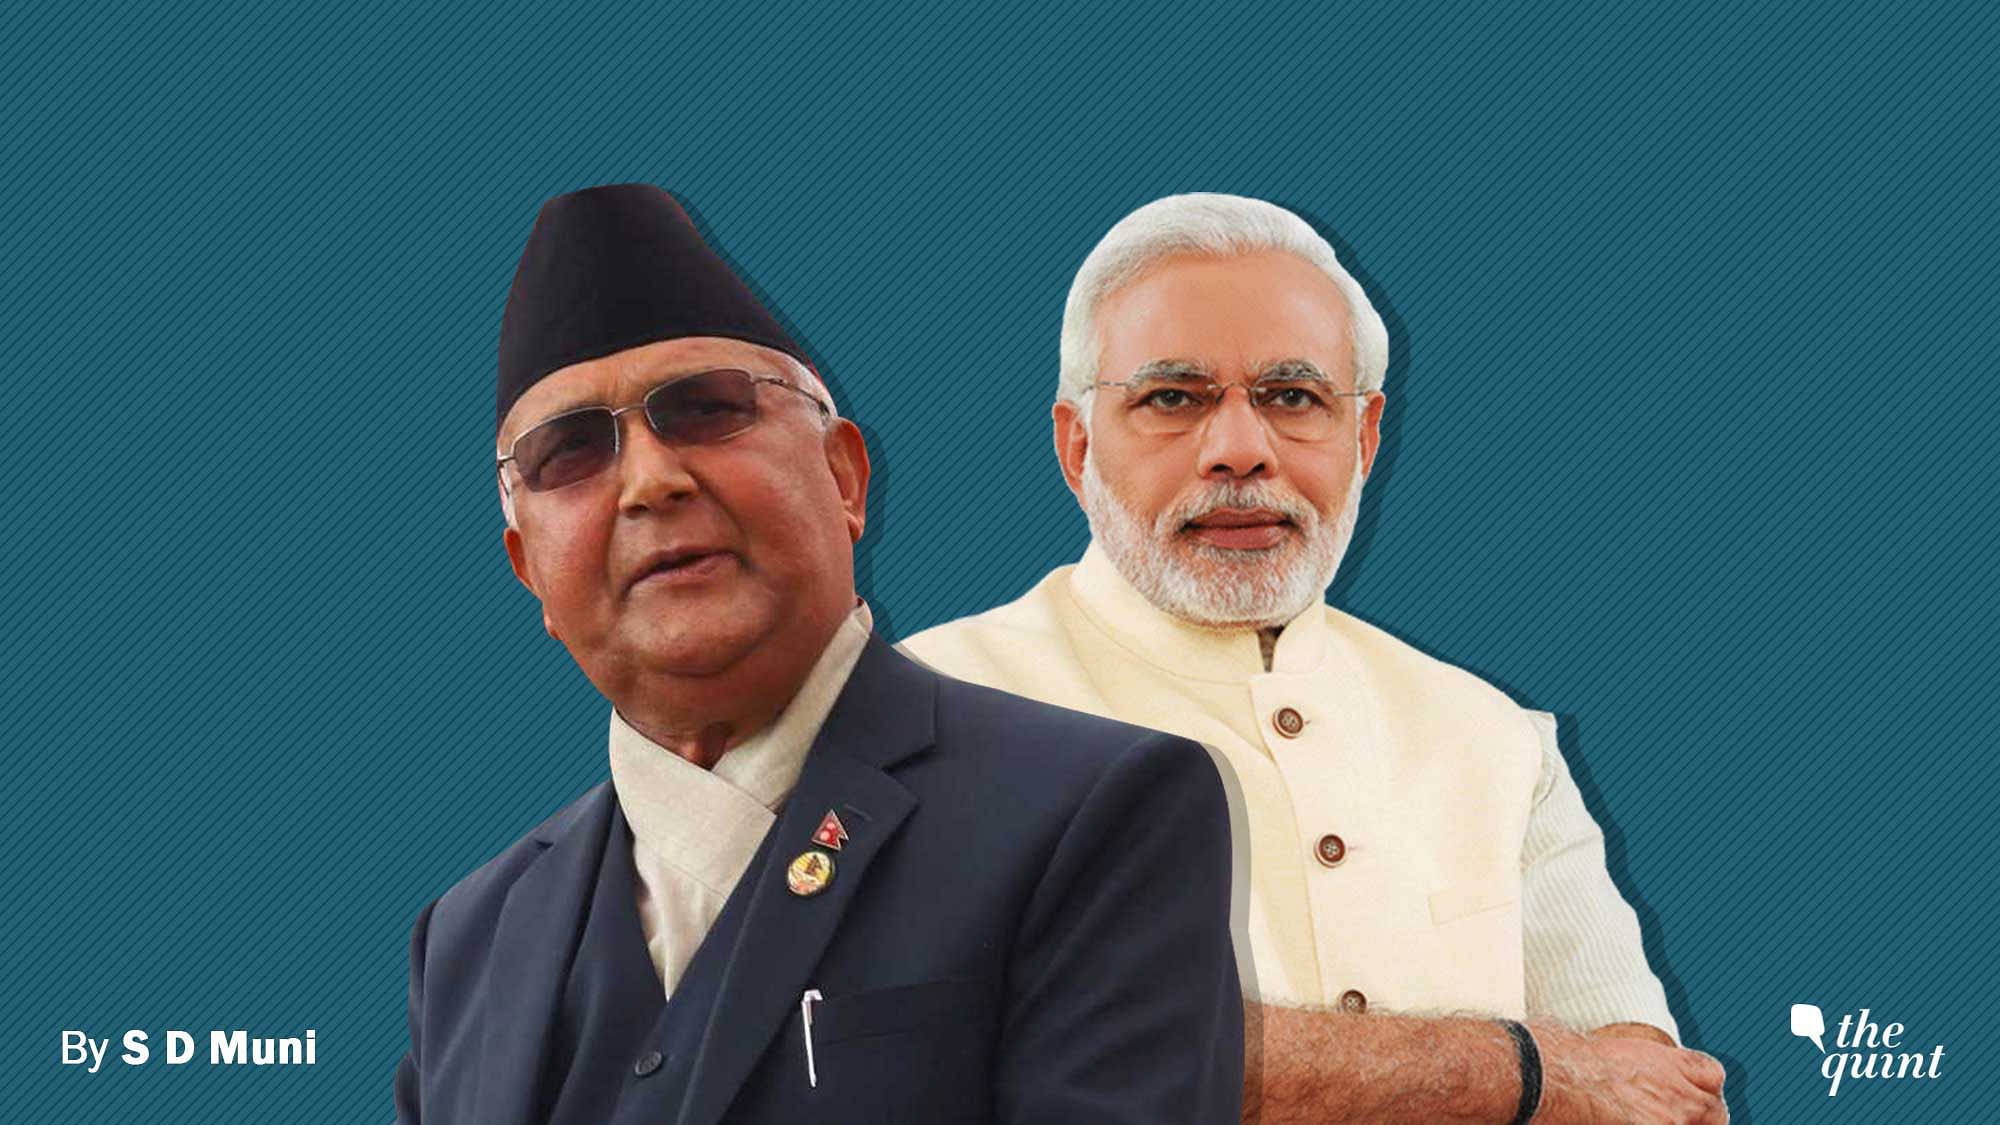 The purpose of Nepal PM’s visit to India was to rebuild trust, which has been seriously vitiated for over 2 years.